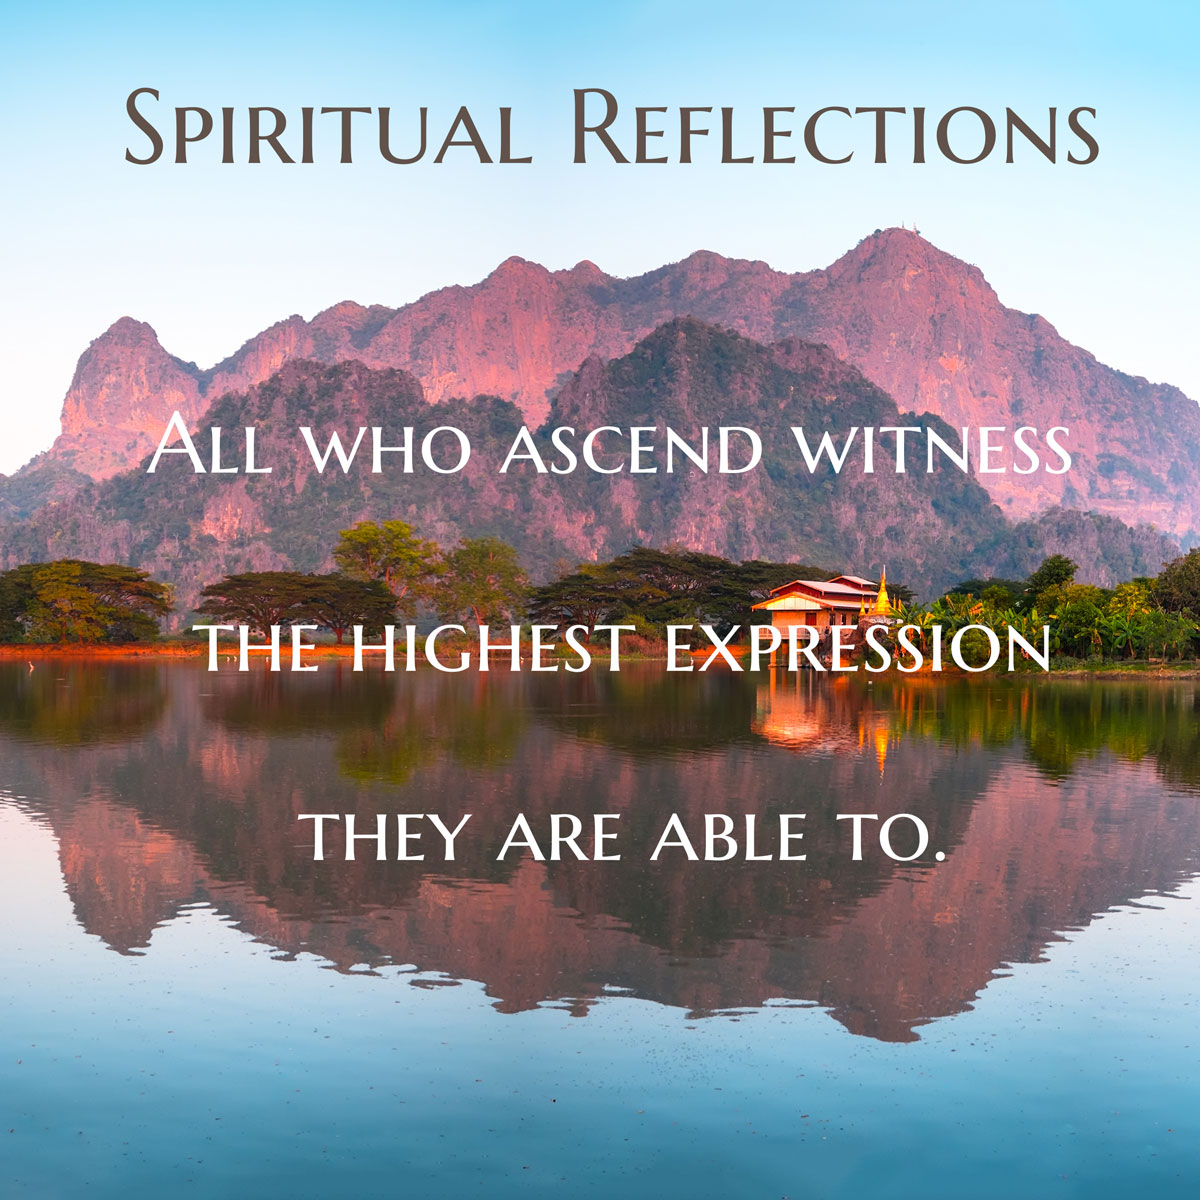 All who ascend witness the highest expression they are able to.